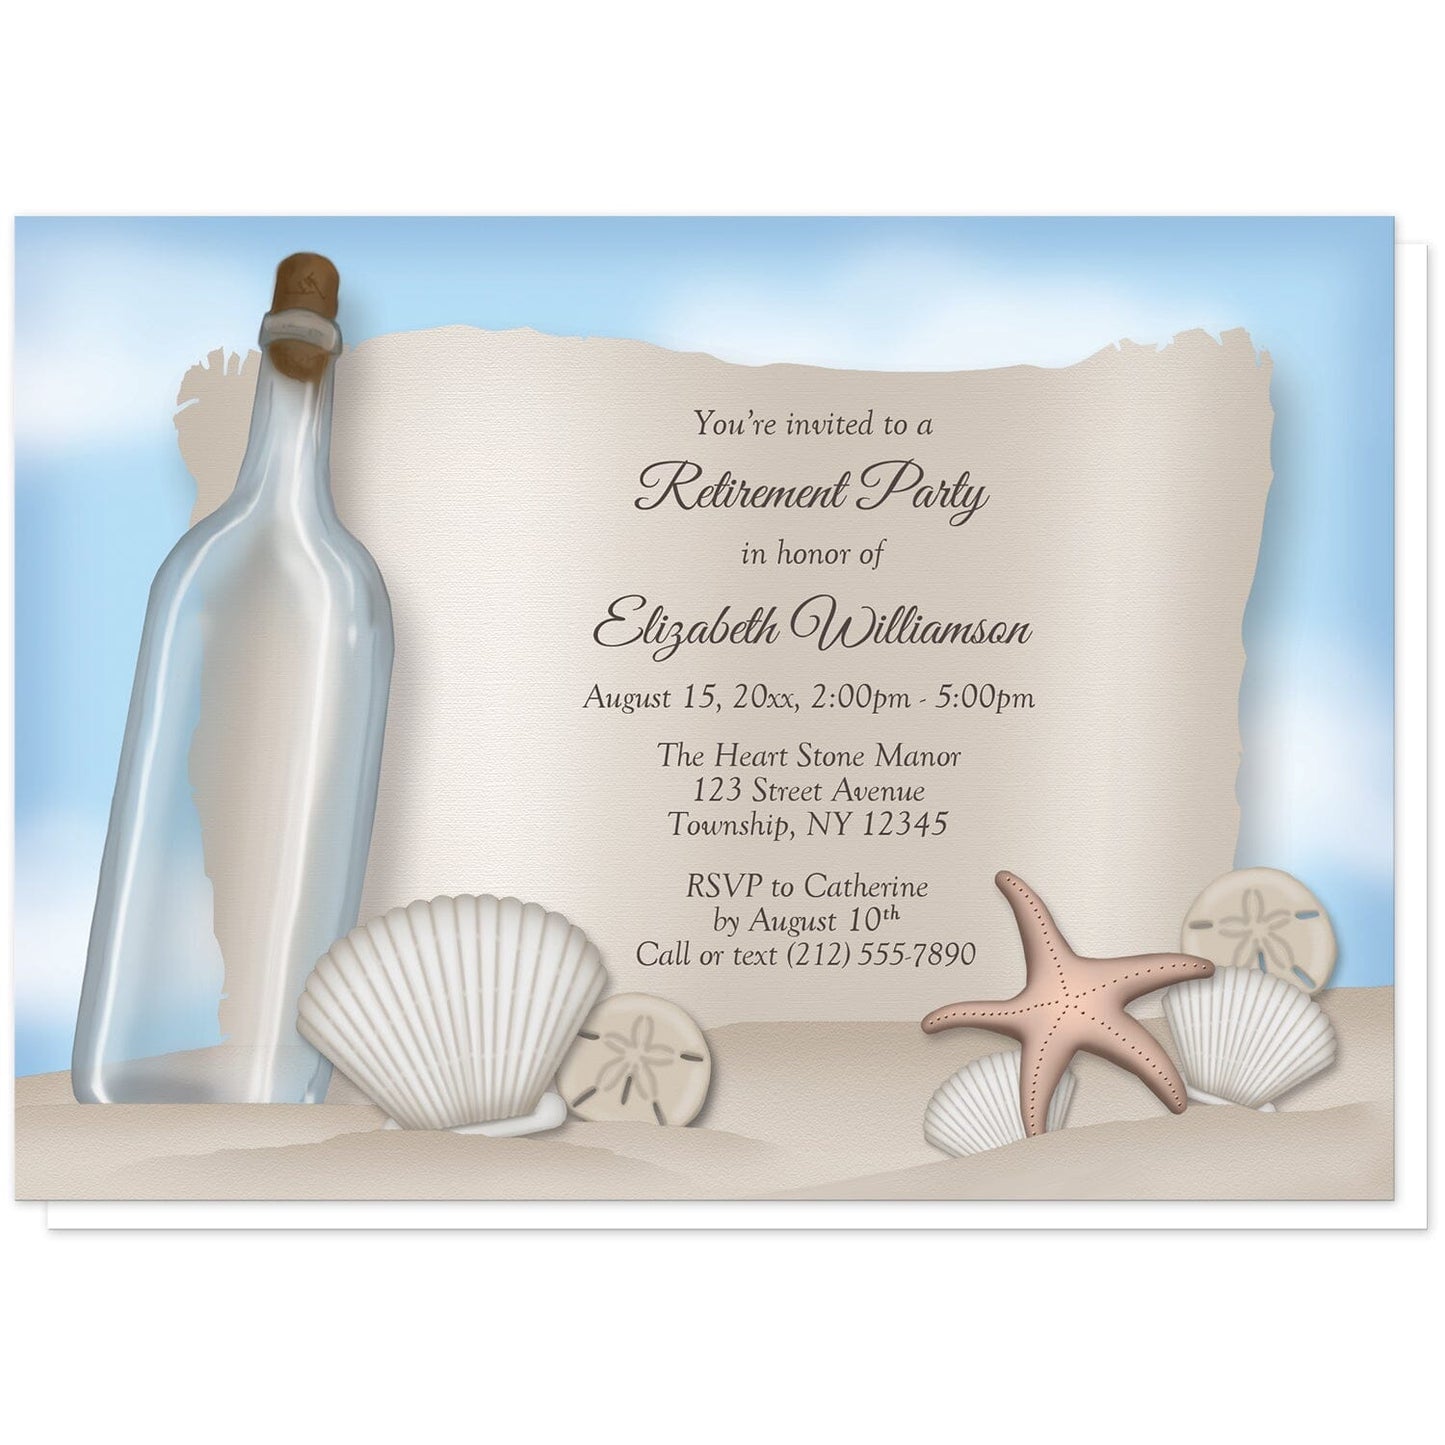 Retirement bottle label free template on Greetings-Discount